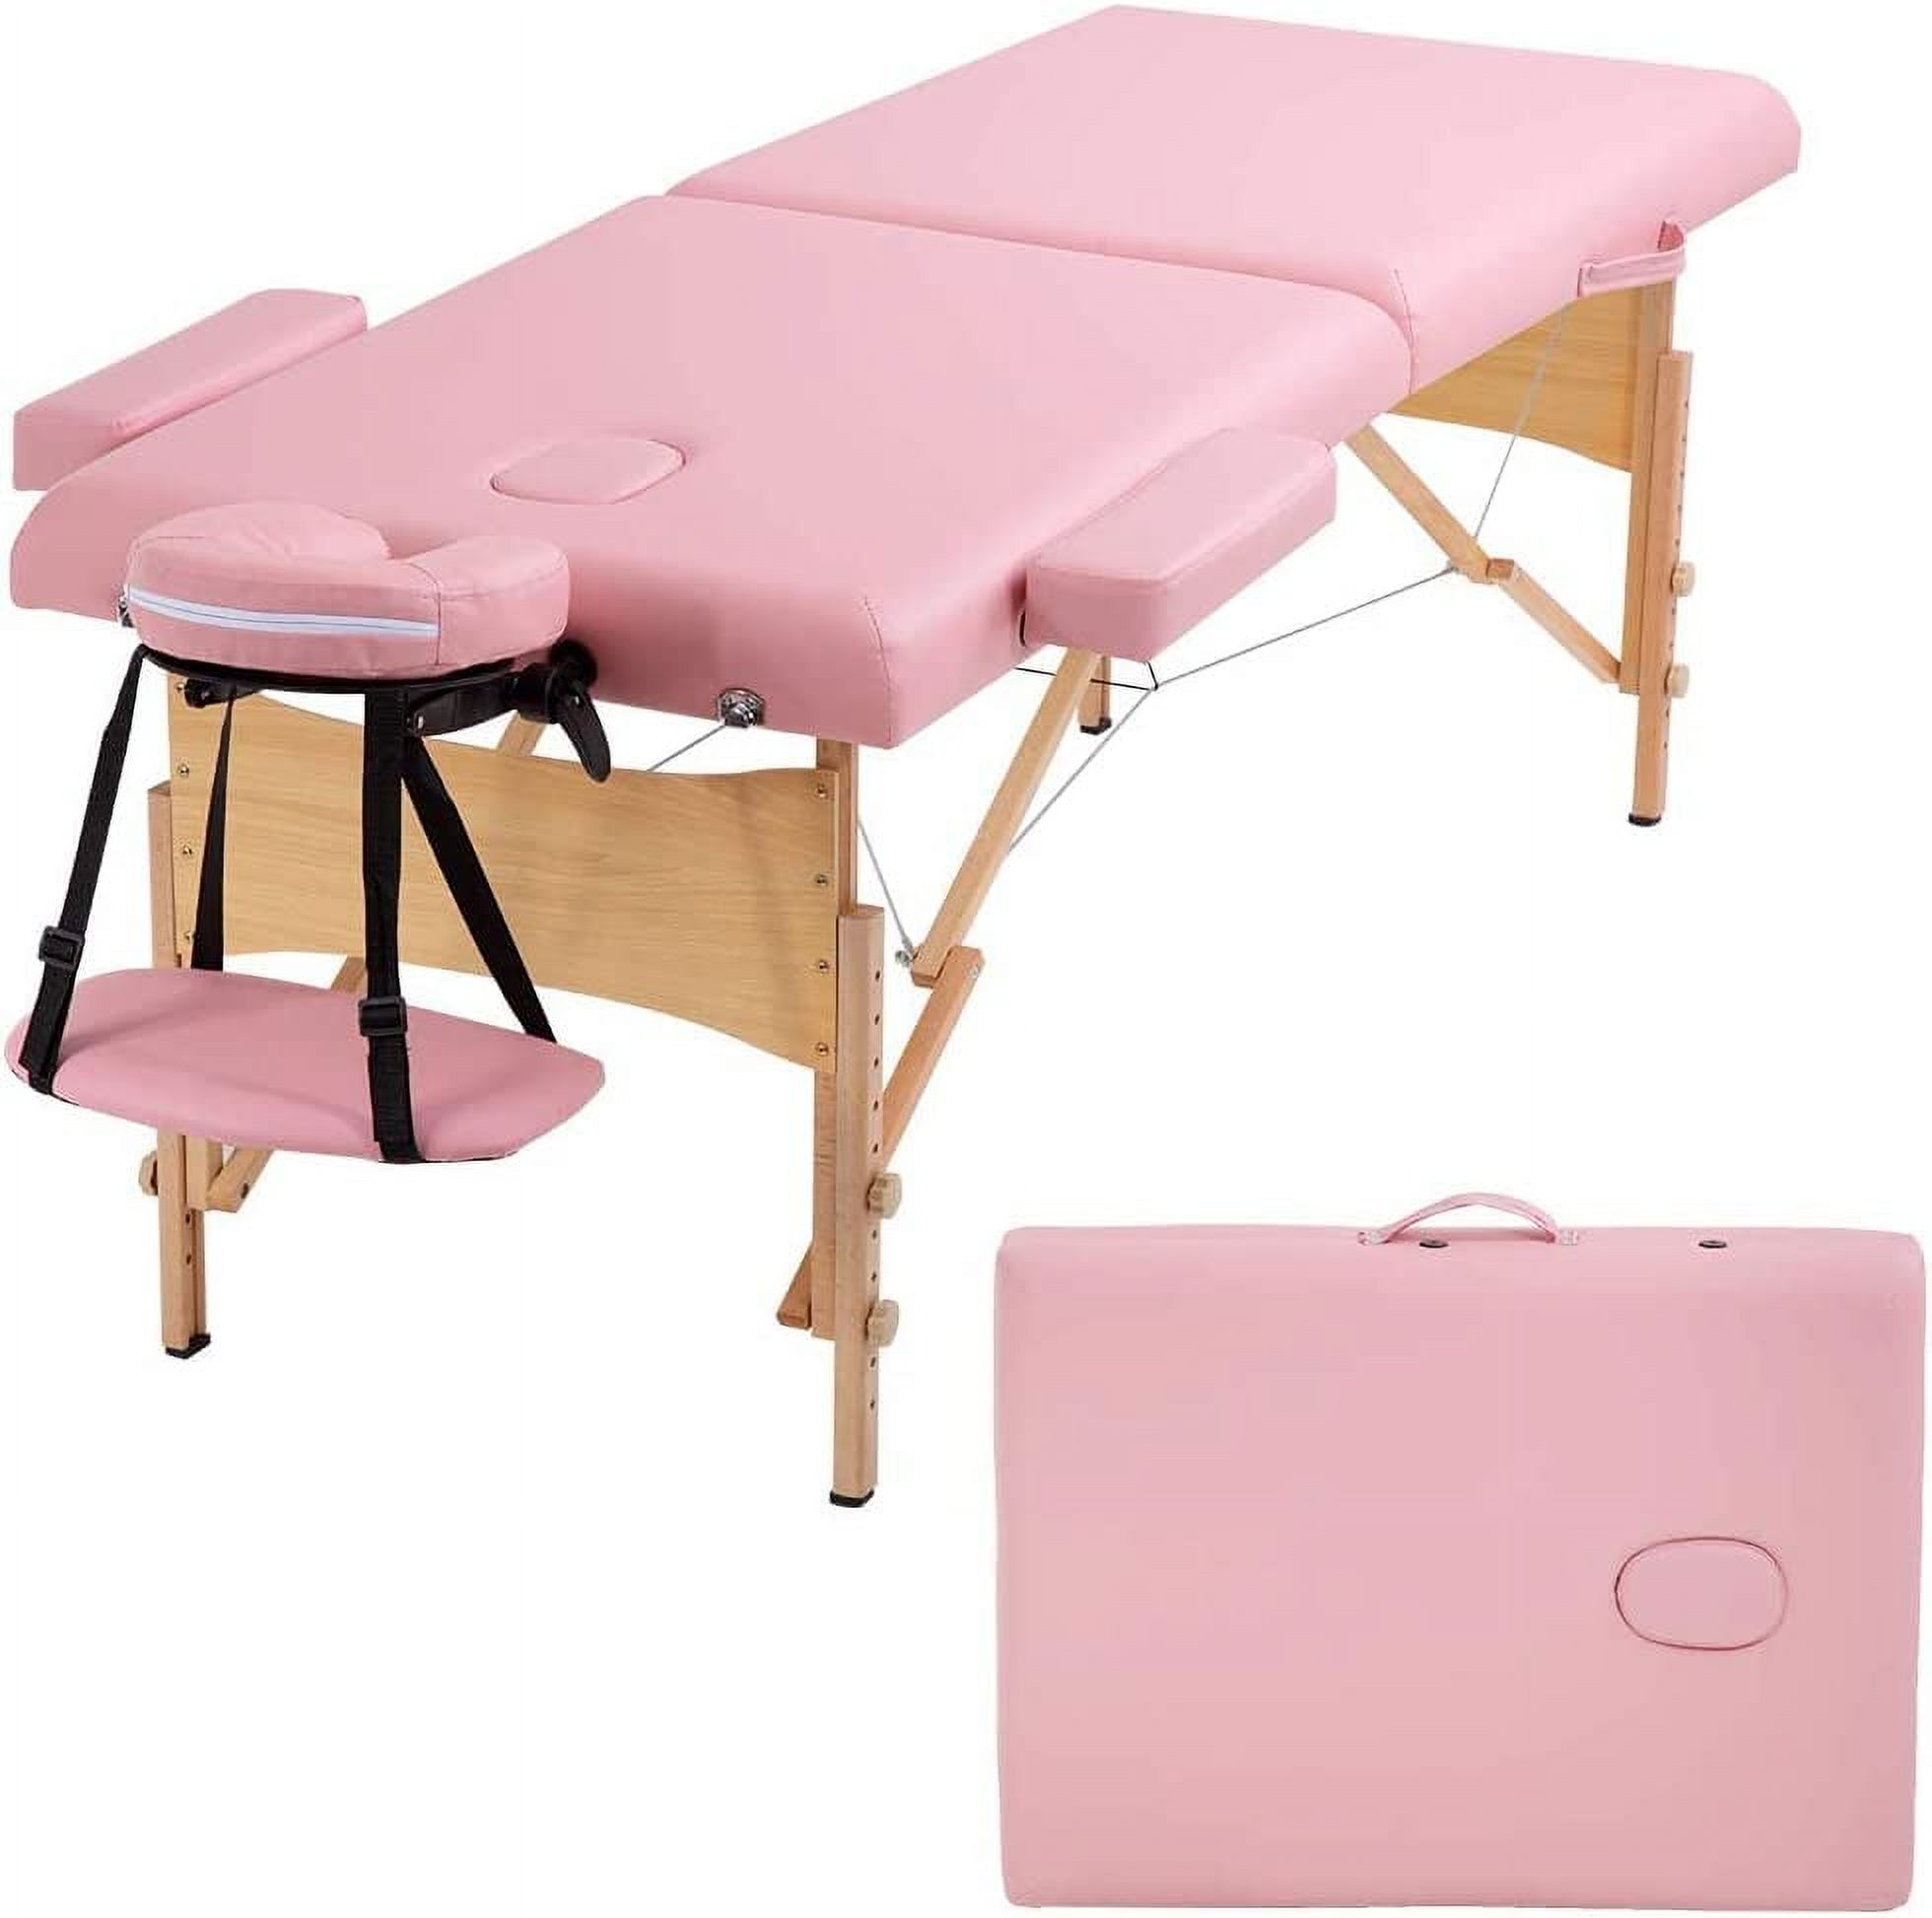 85 Inch Portable Massage Table Massage Bed SPA Bed Height Adjustable 2 Fold PU 2 Inch Thick Sponge Deluxe Backpack - image 1 of 7